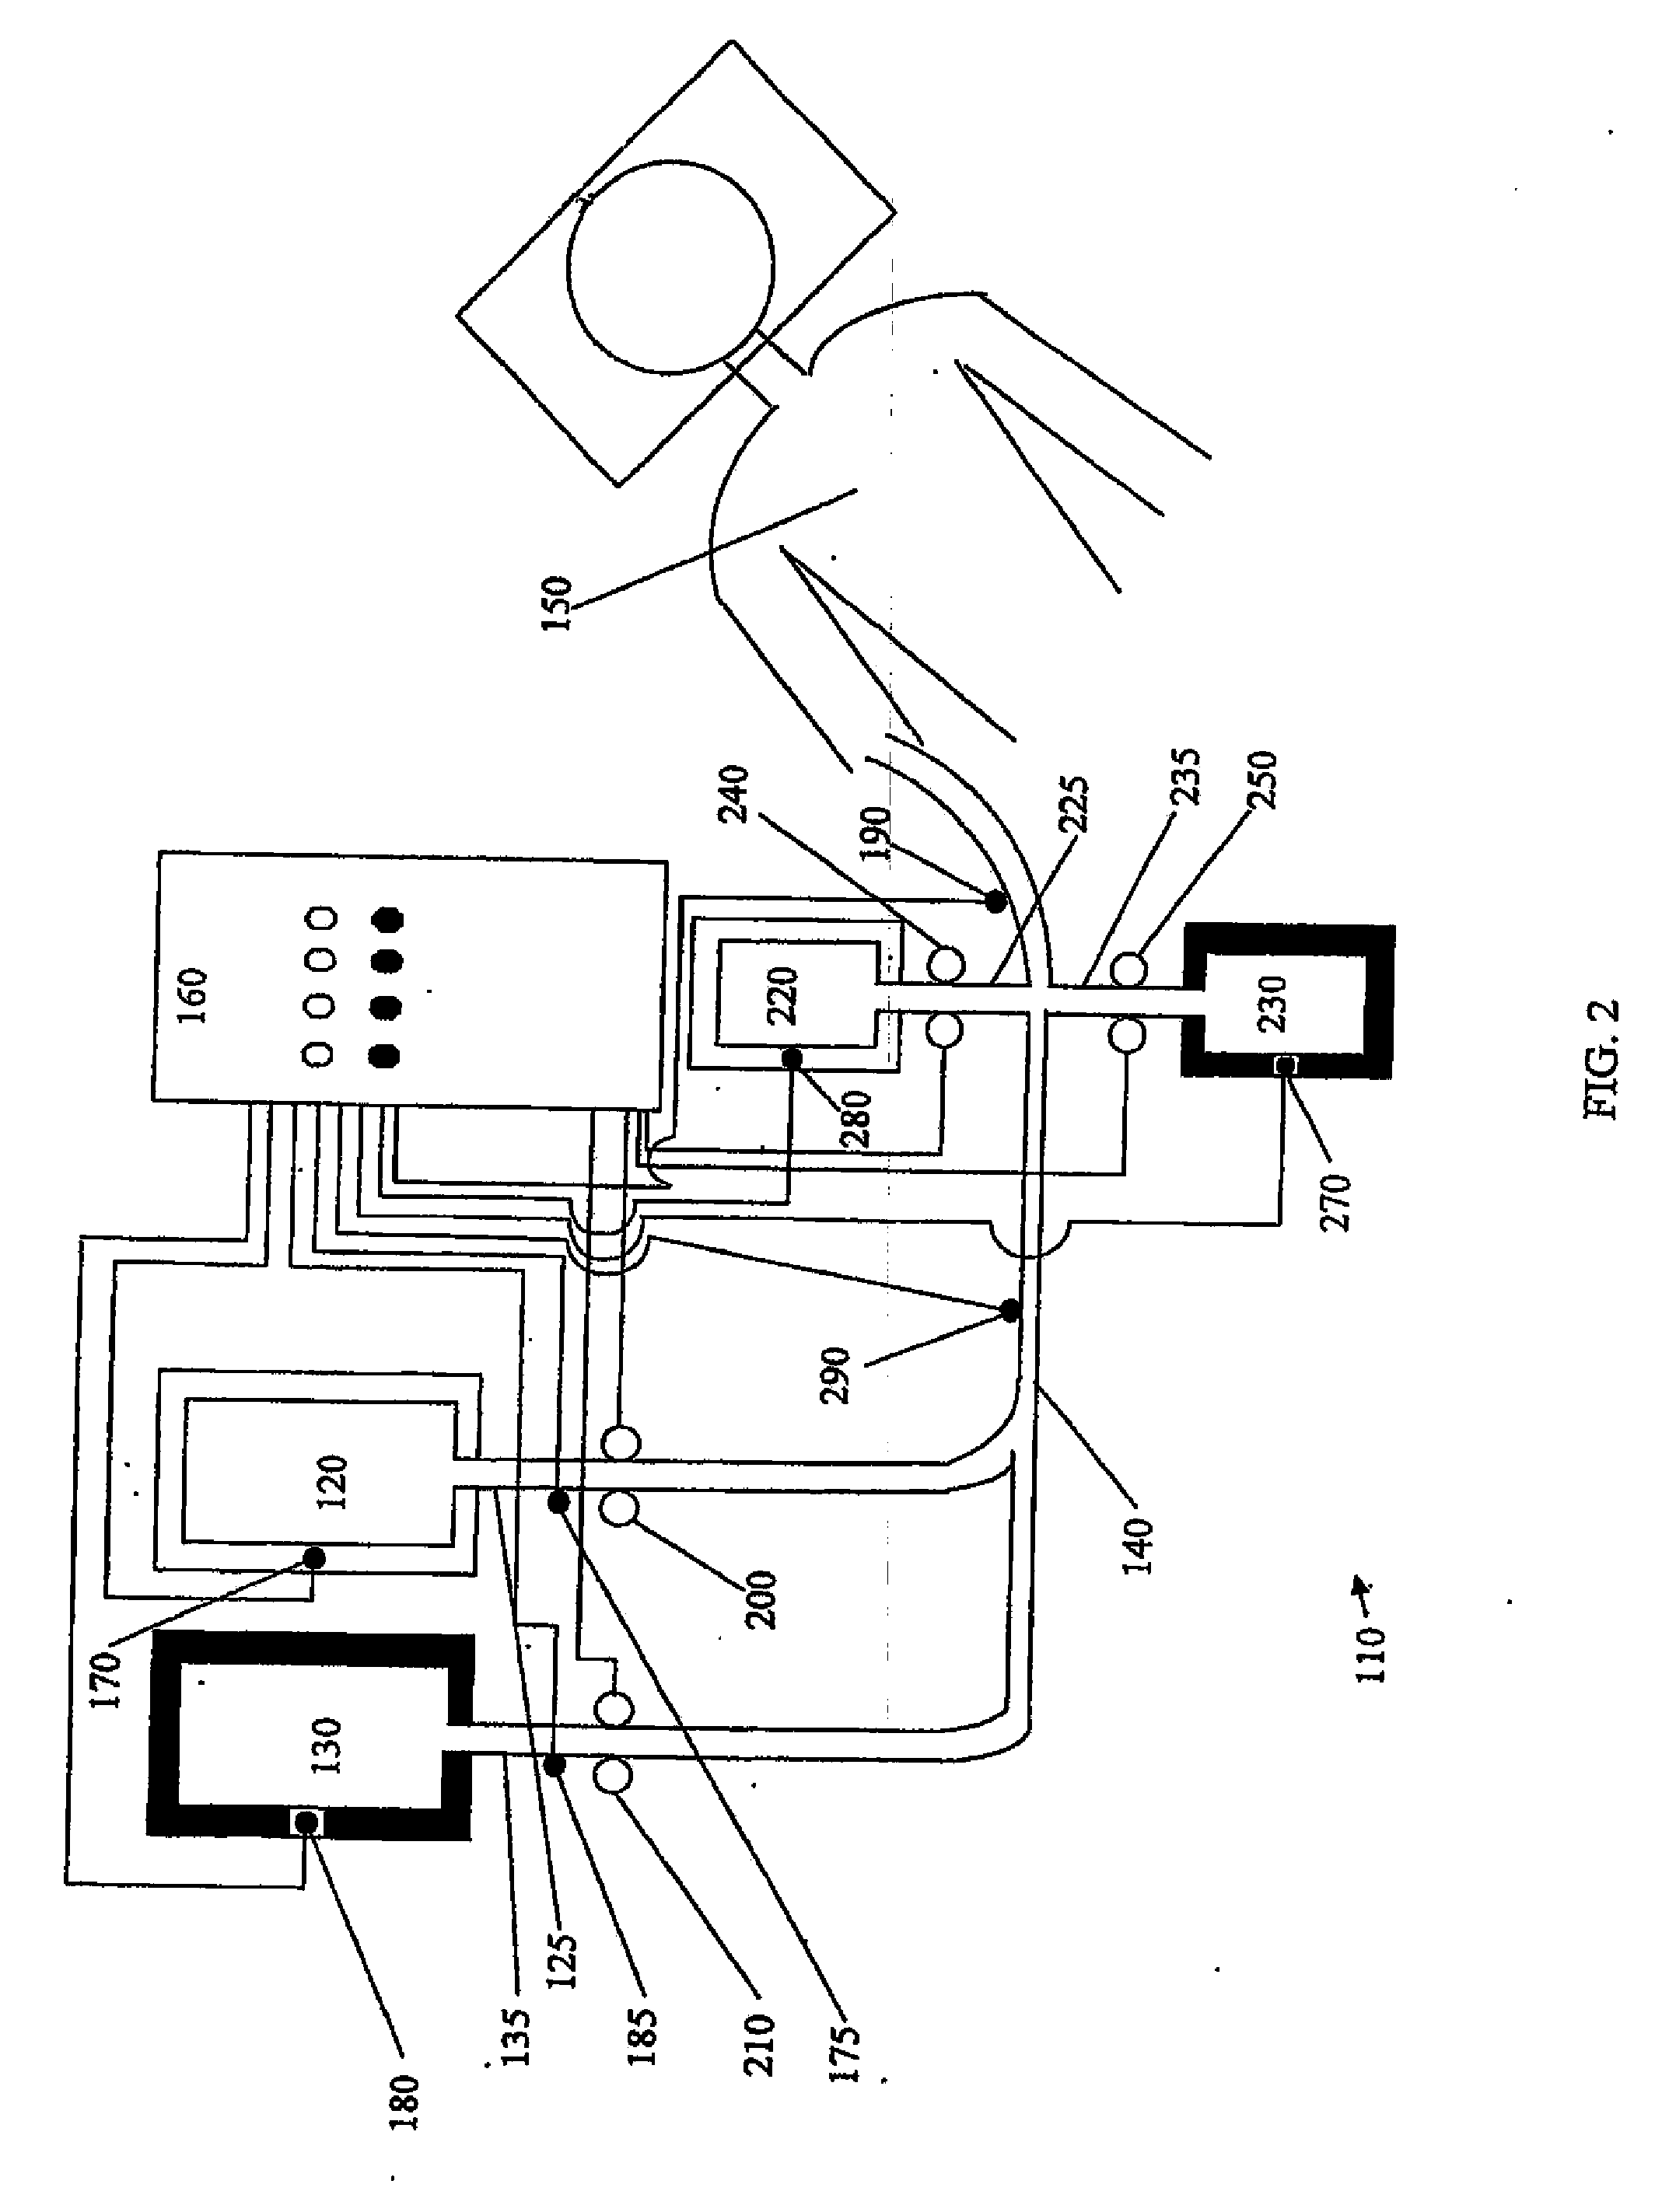 Systems and methods for imaging a blood vessel using temperature sensitive magnetic resonance imaging